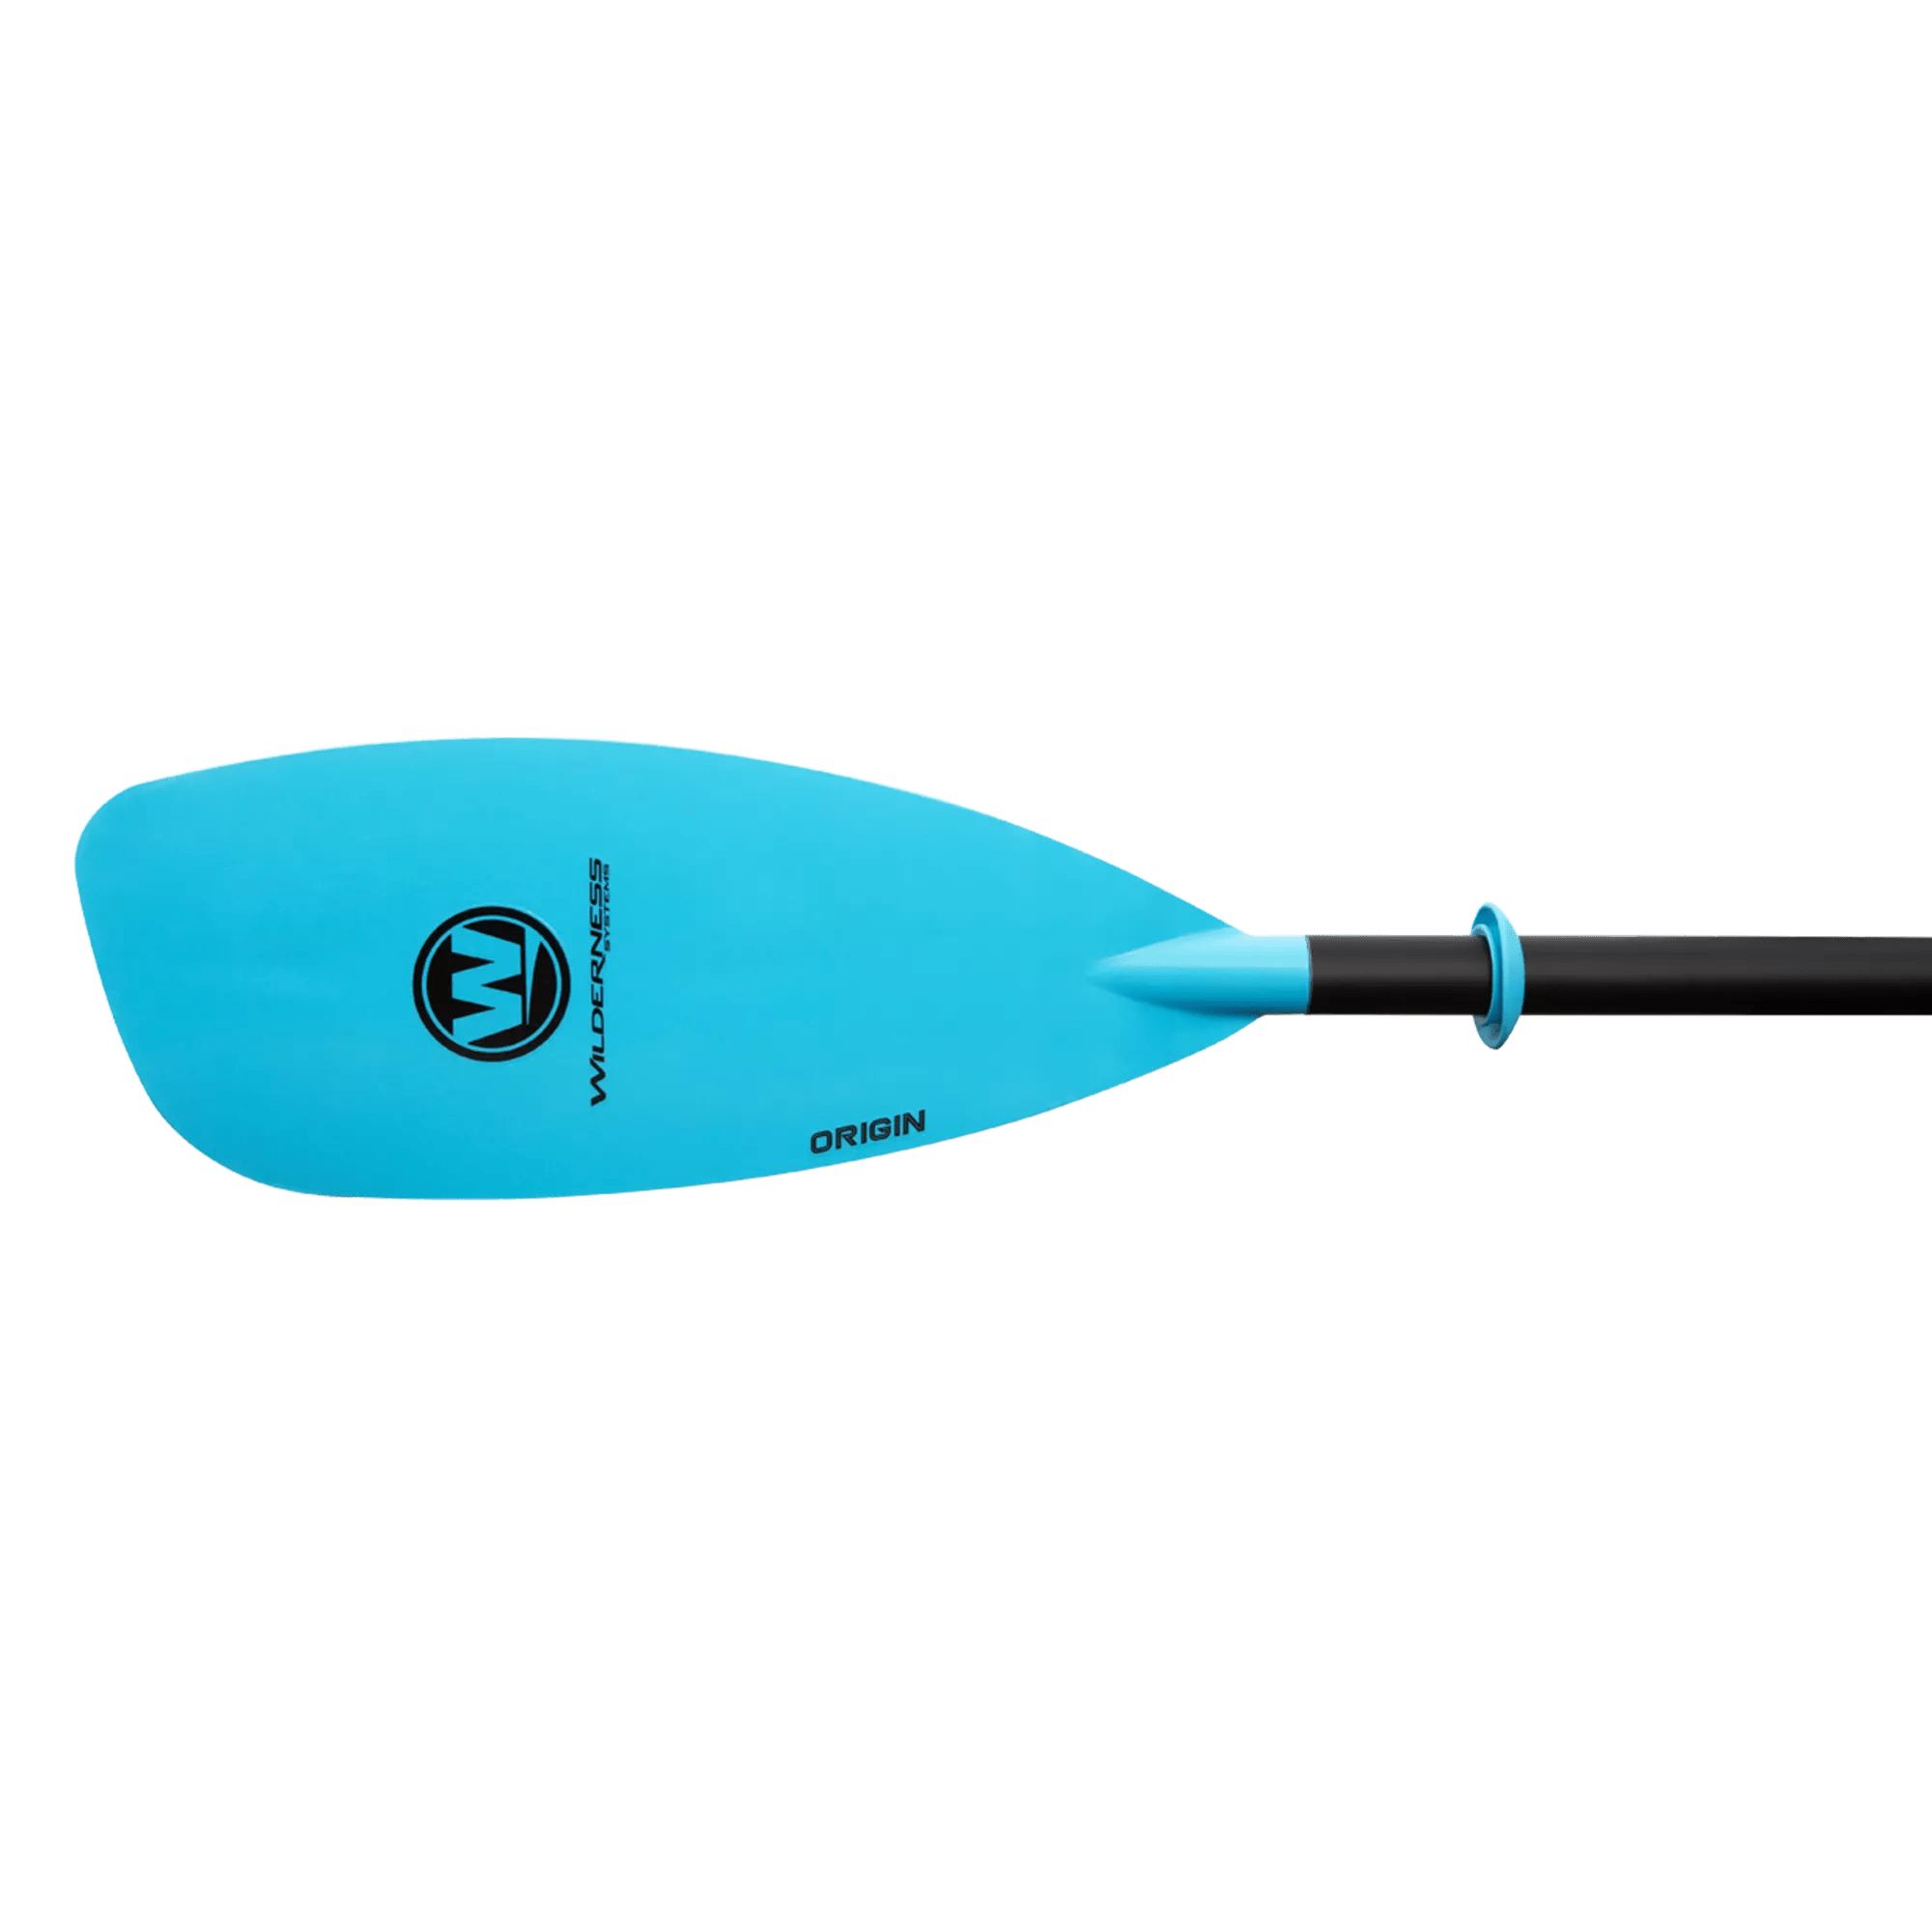 WILDERNESS SYSTEMS - Origin Glass Touring Paddle 220-240 cm - Blue - 8070207 - TOP